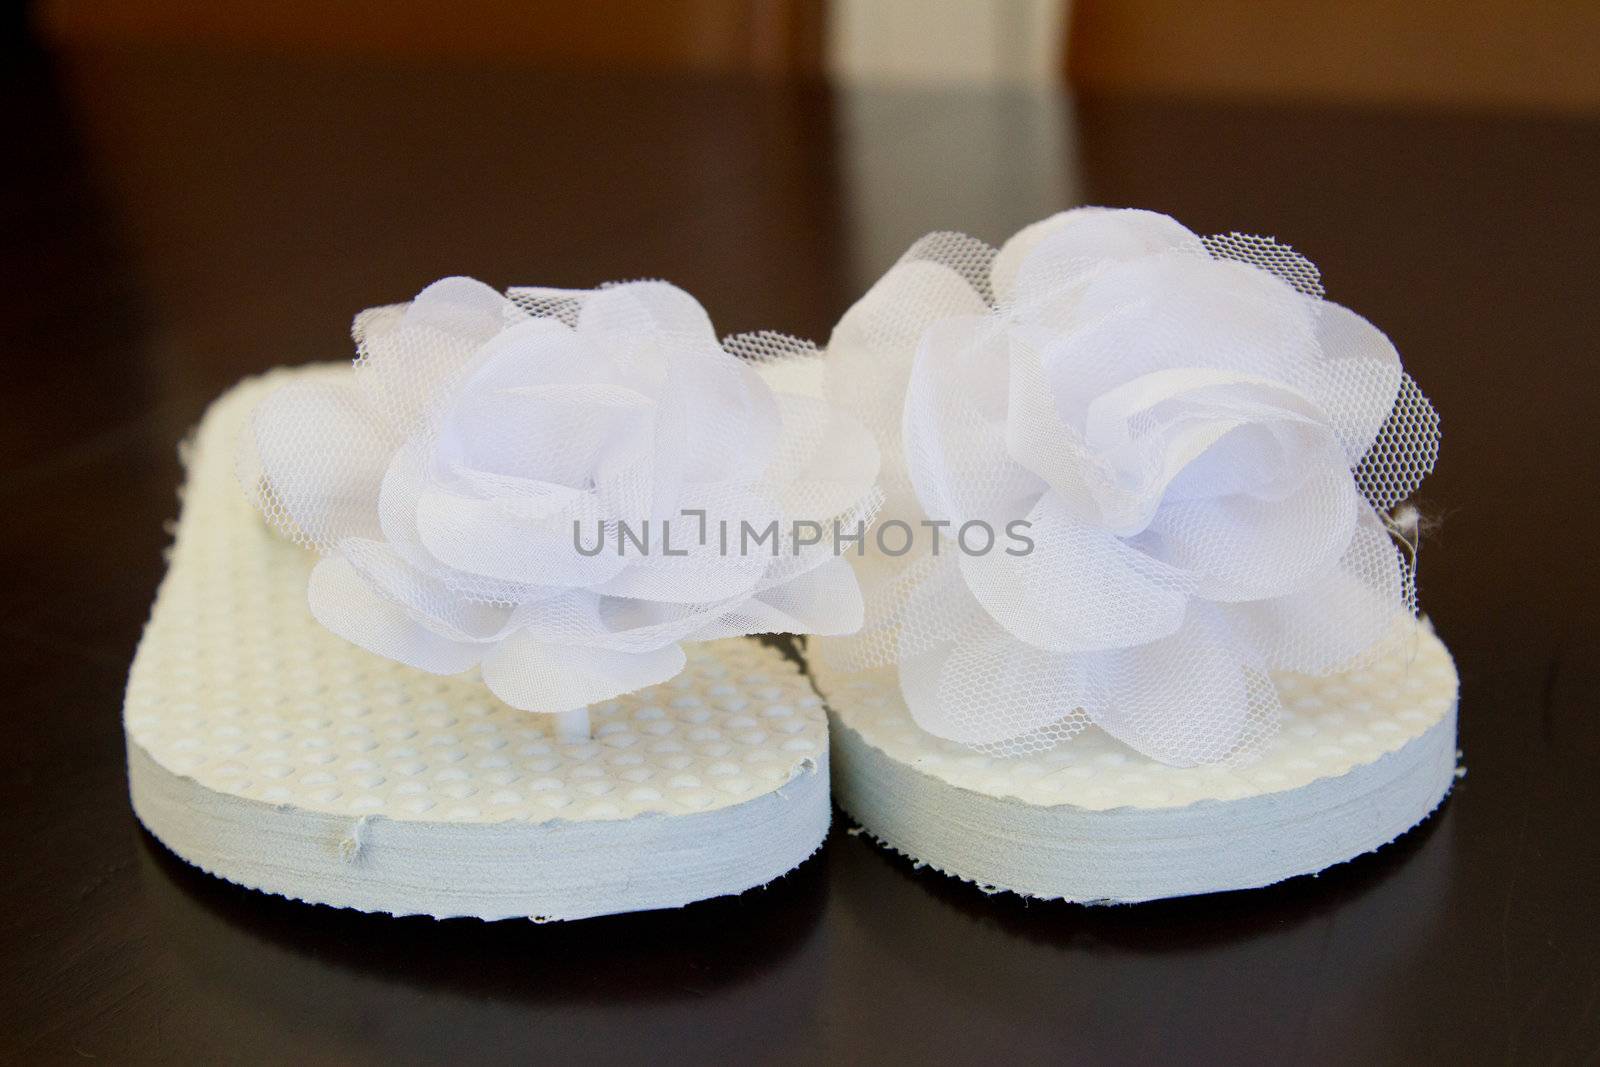 Simple white flip flop sandals for a bride to wear on her wedding day.